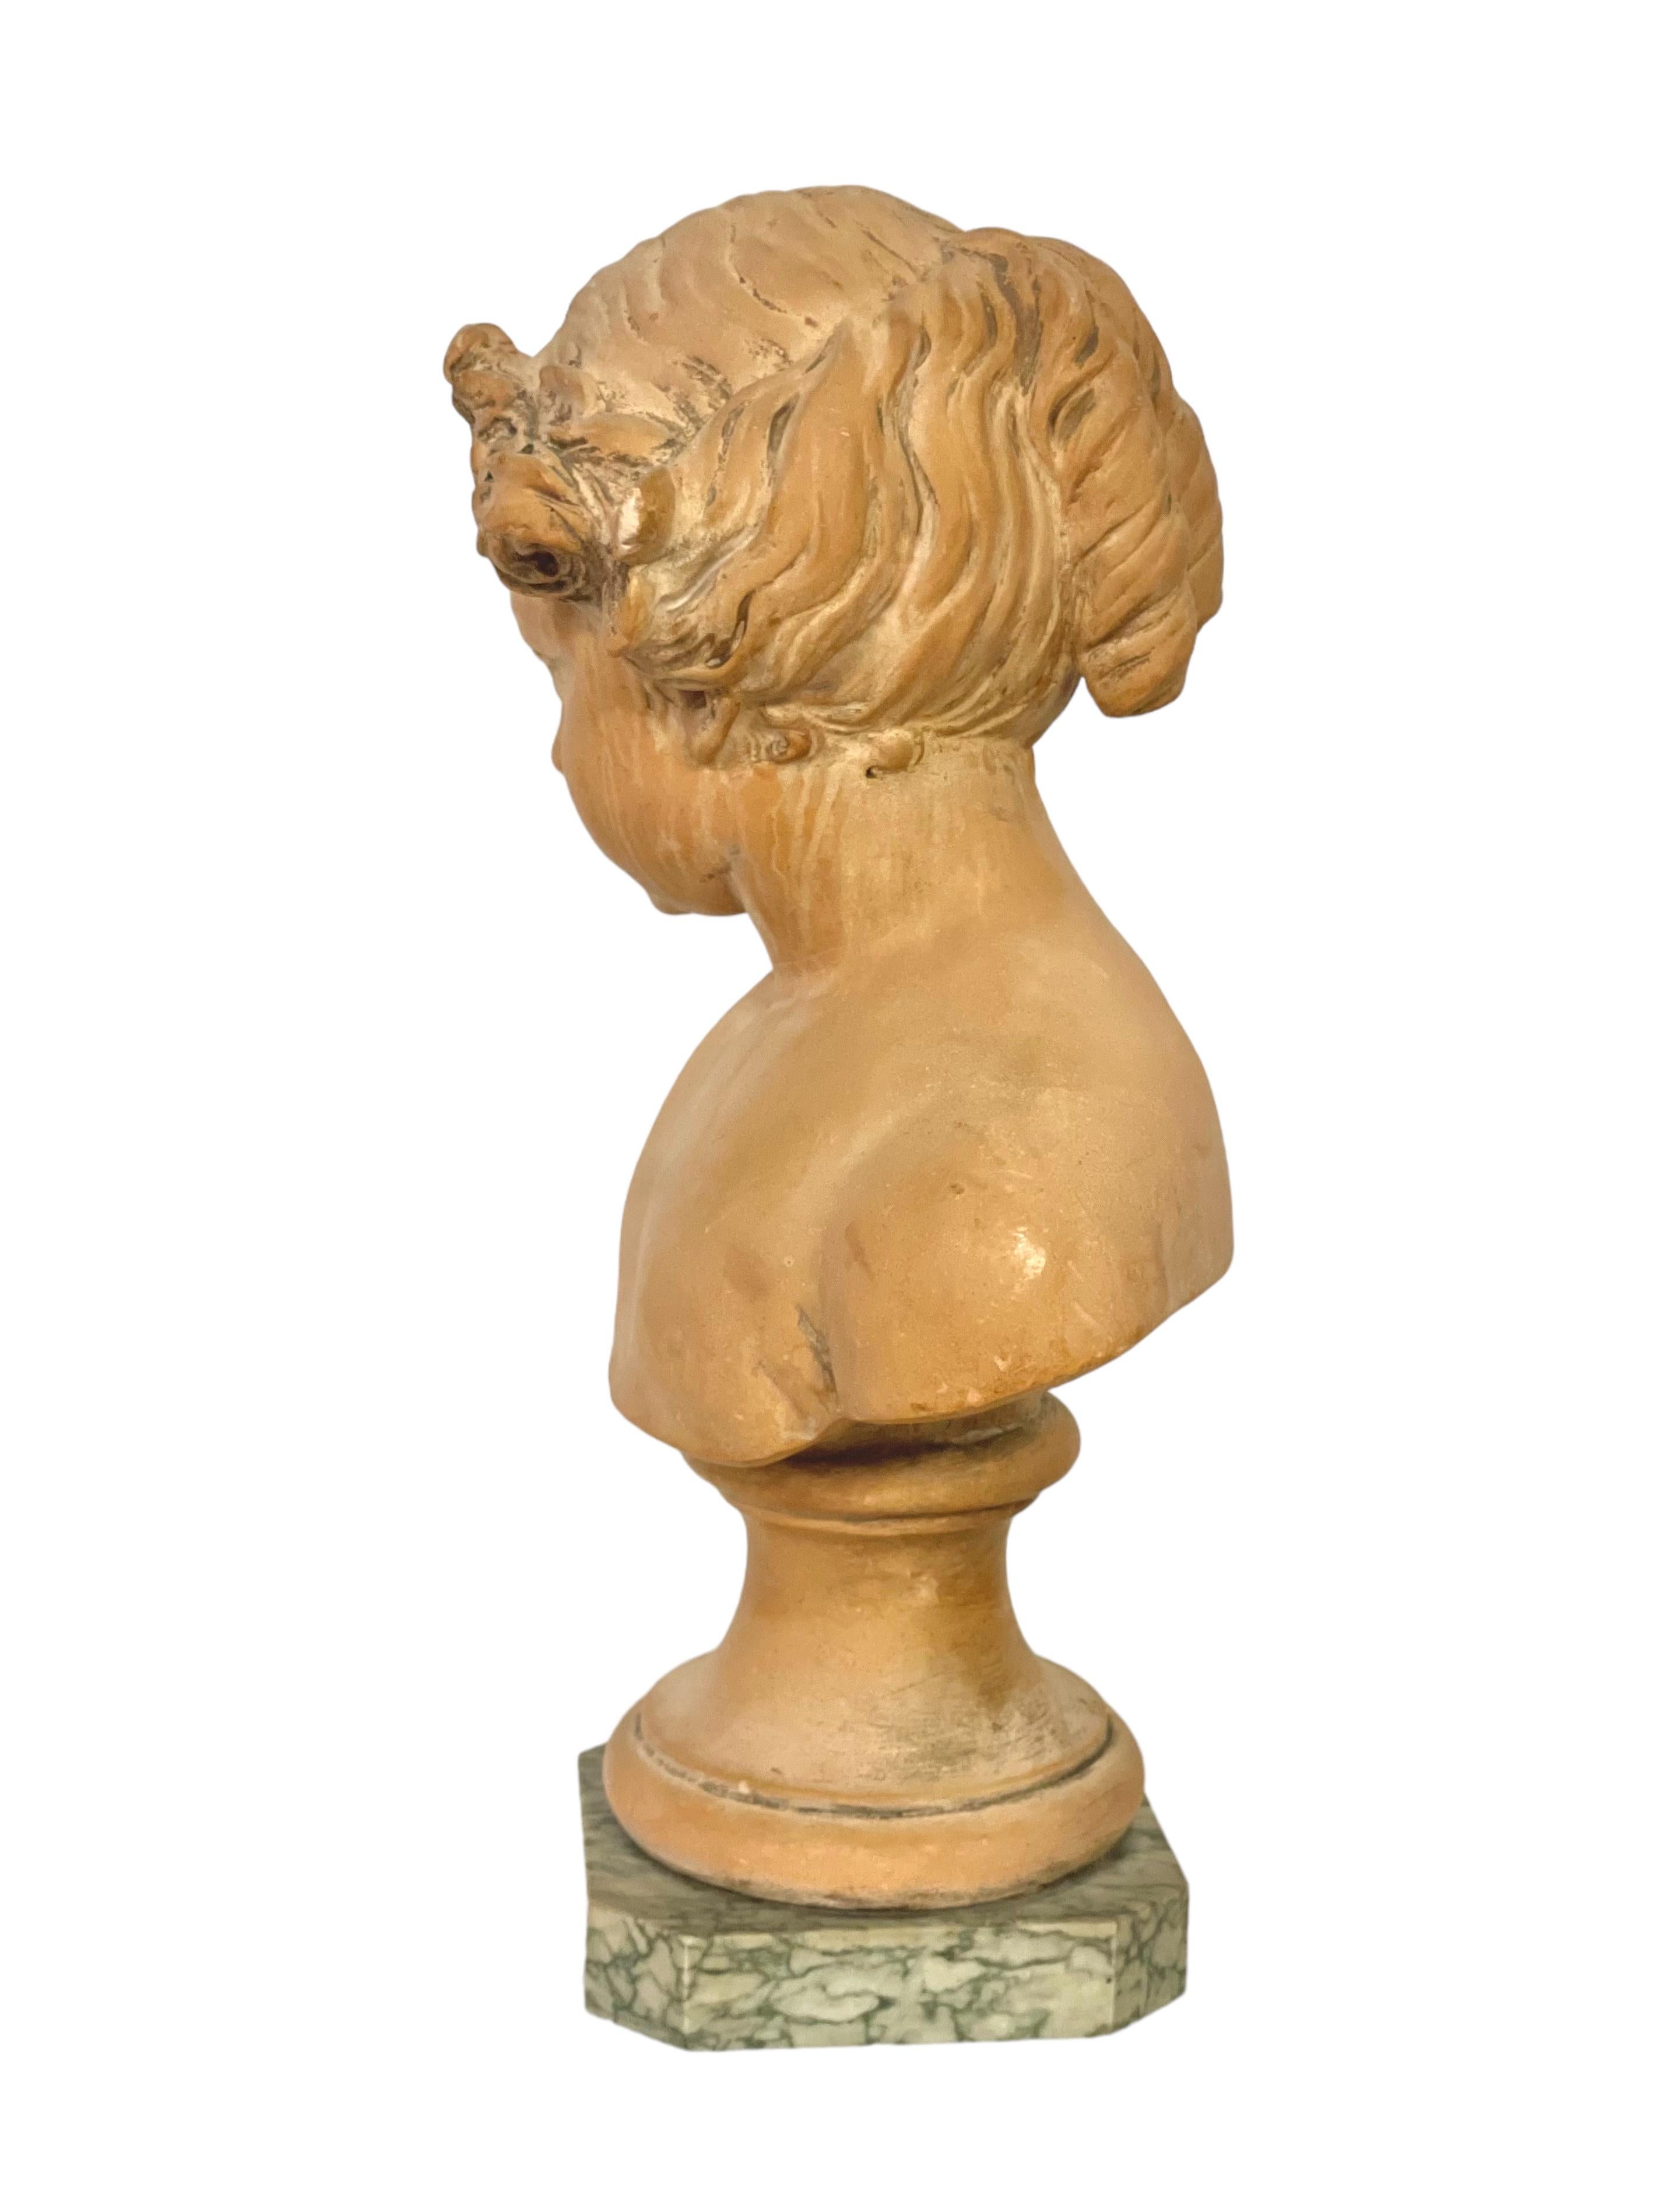 19th Century Terracotta Bust of Young Maiden in a Romantic Style For Sale 4